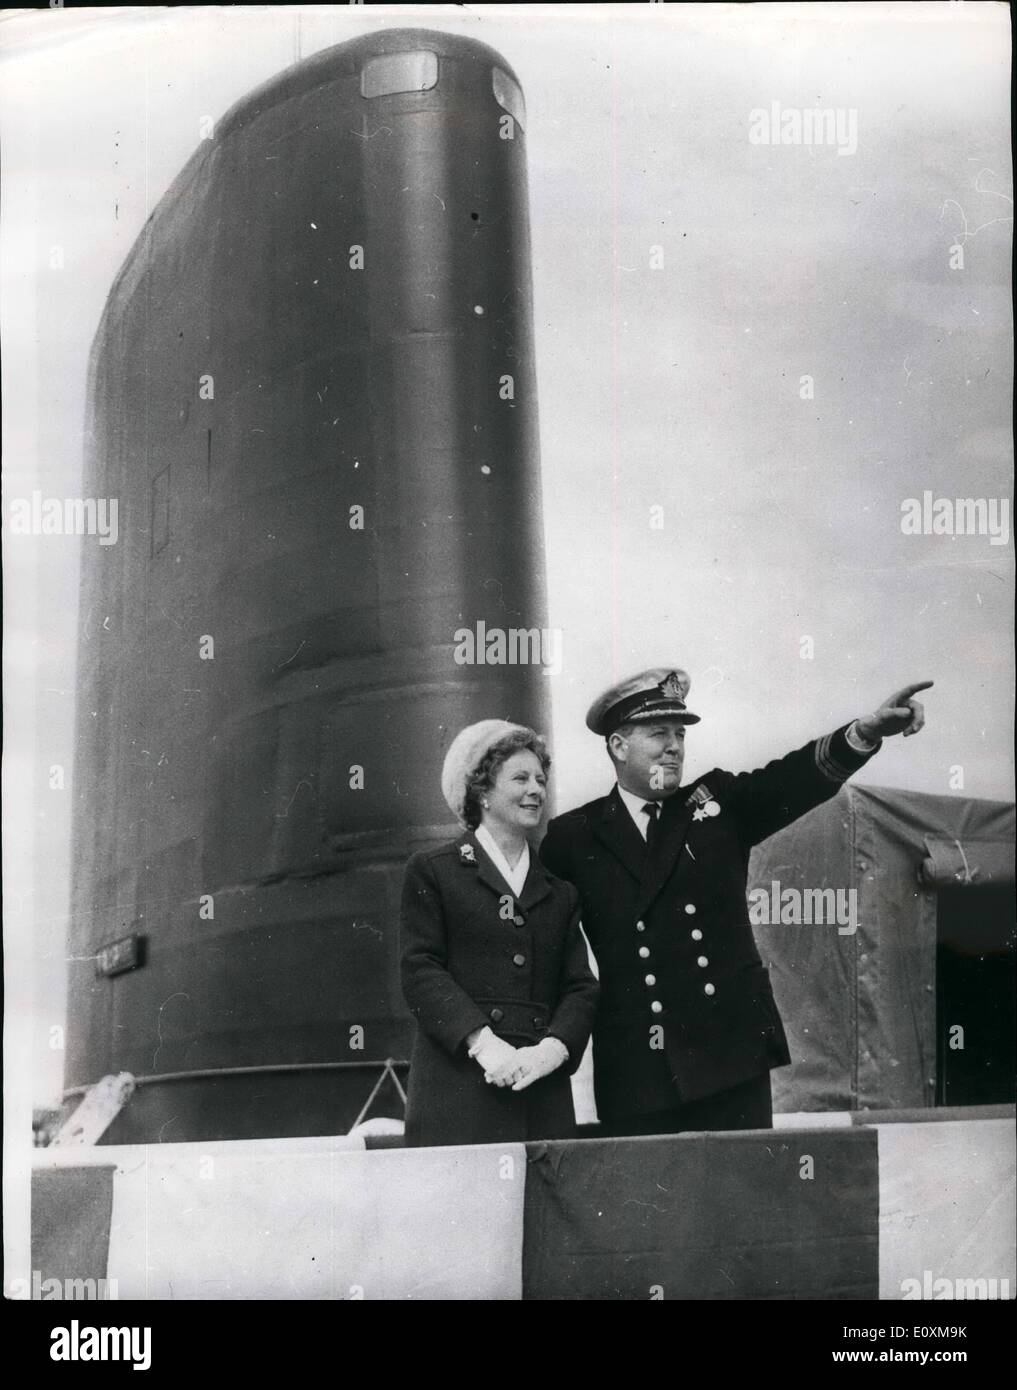 Apr. 04, 1967 - Third British Nuclear Fleet Submarine '' Warspite'' Commissioned: Britain's third nuclear Fleet submarine H.M.S. Warspite, was commissioned for service with the Royal Navy at the Barrow-in-Furness Yard of Messrs. Vickers Limited (Shipbuilding Group), yesterday. The guest of honour at the ceremony was Mrs. Wilson wife of the Prime Minister. Mrs. Wilson named the submarine at the launch is September 1965. The Warspite, which is of all-British construction, has a lenghth of 285-feet, and a beam of 33 feet Stock Photo